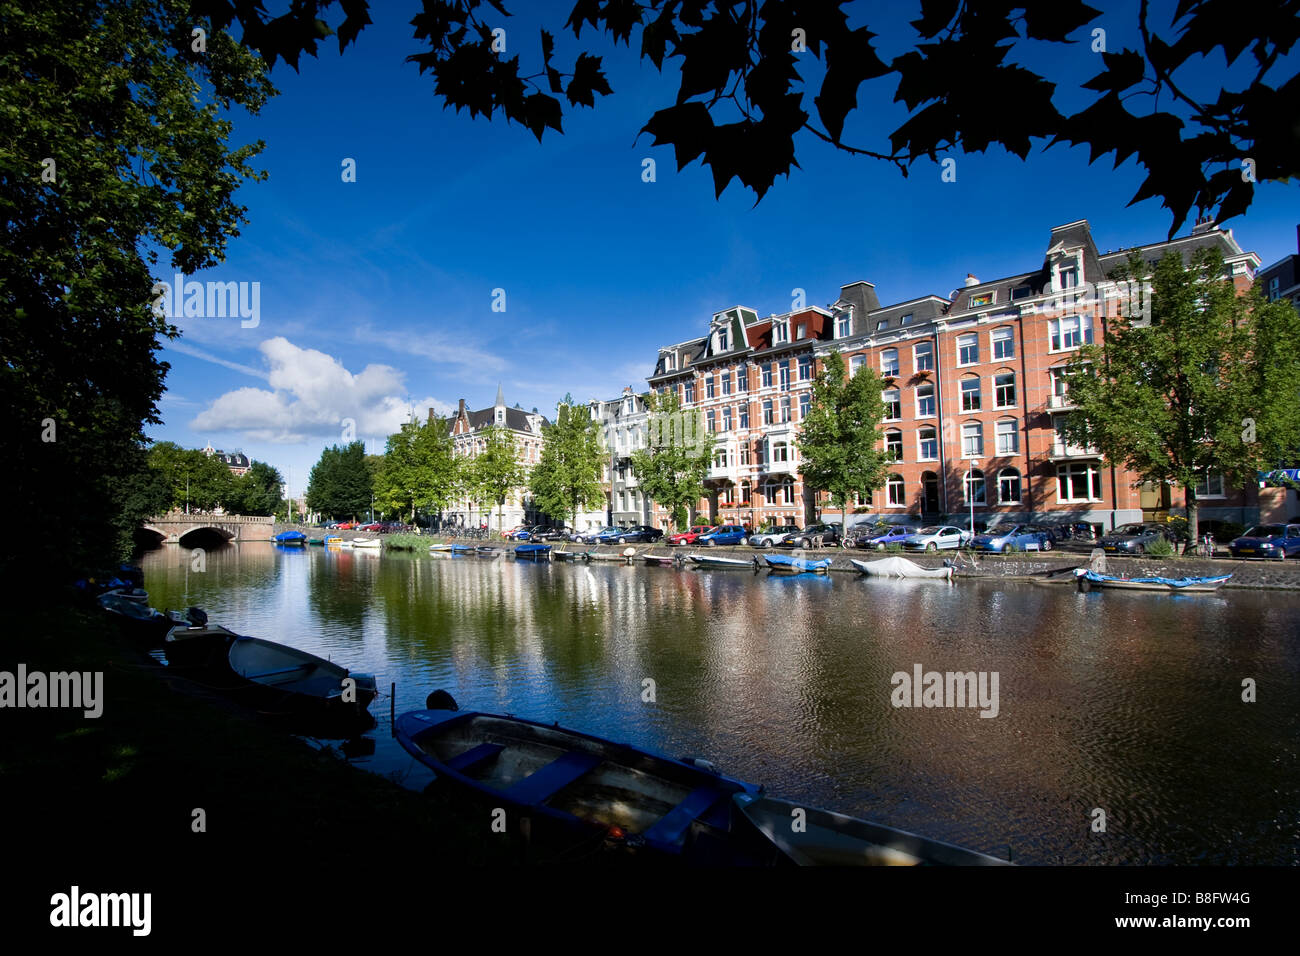 View of a channel and buildings in Amsterdam Netherlands Stock Photo